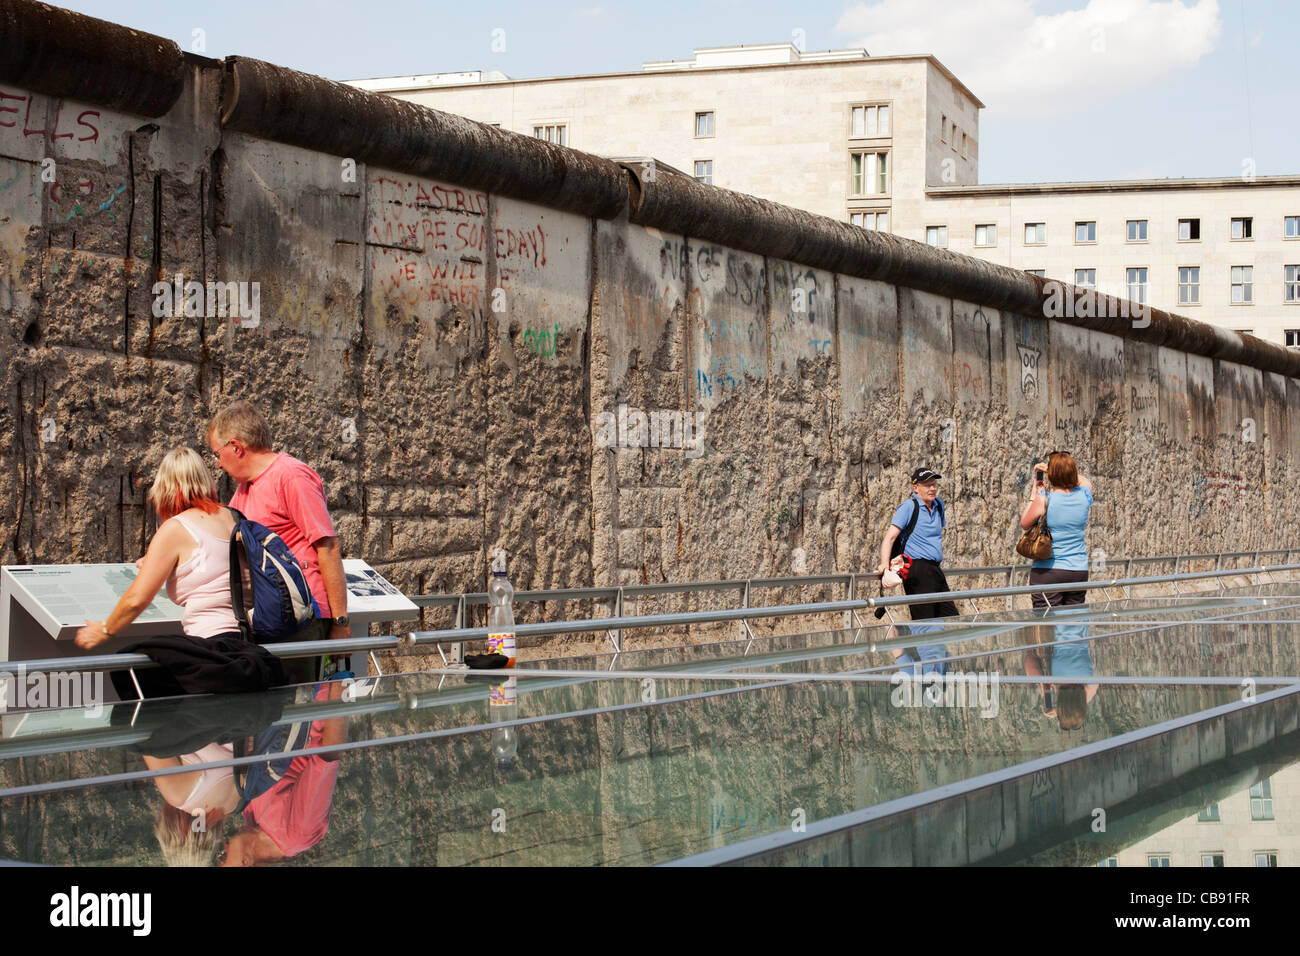 Sightseers at the Berlin Wall Monument - a preserved section of the Berlin Wall that formerly separated East from West. Stock Photo